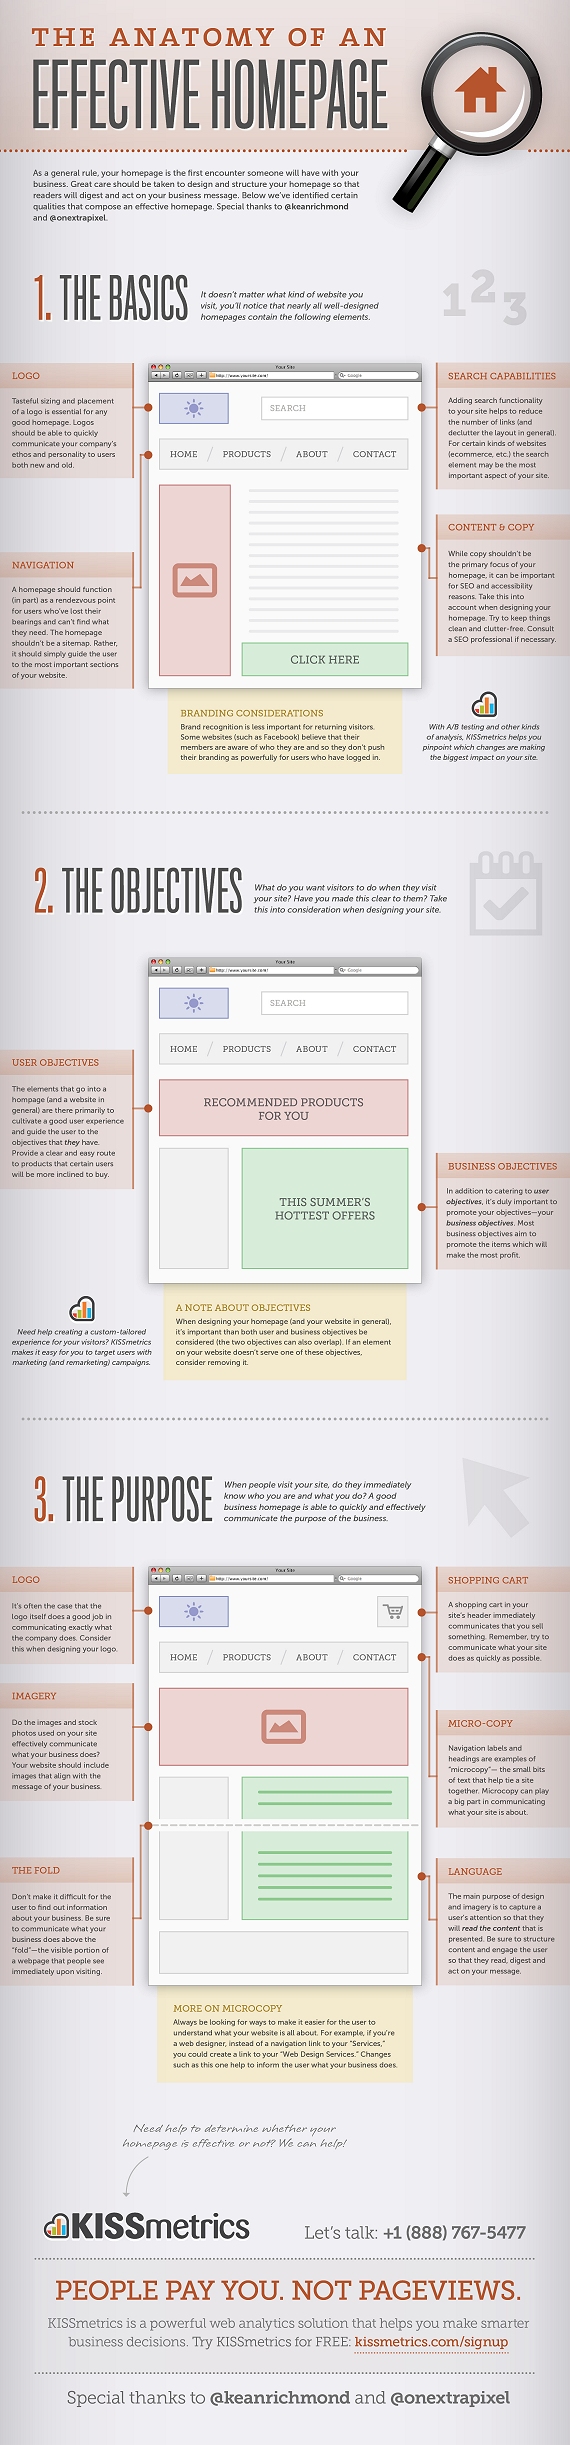 Infographic: The Anatomy of an Effective Homepage